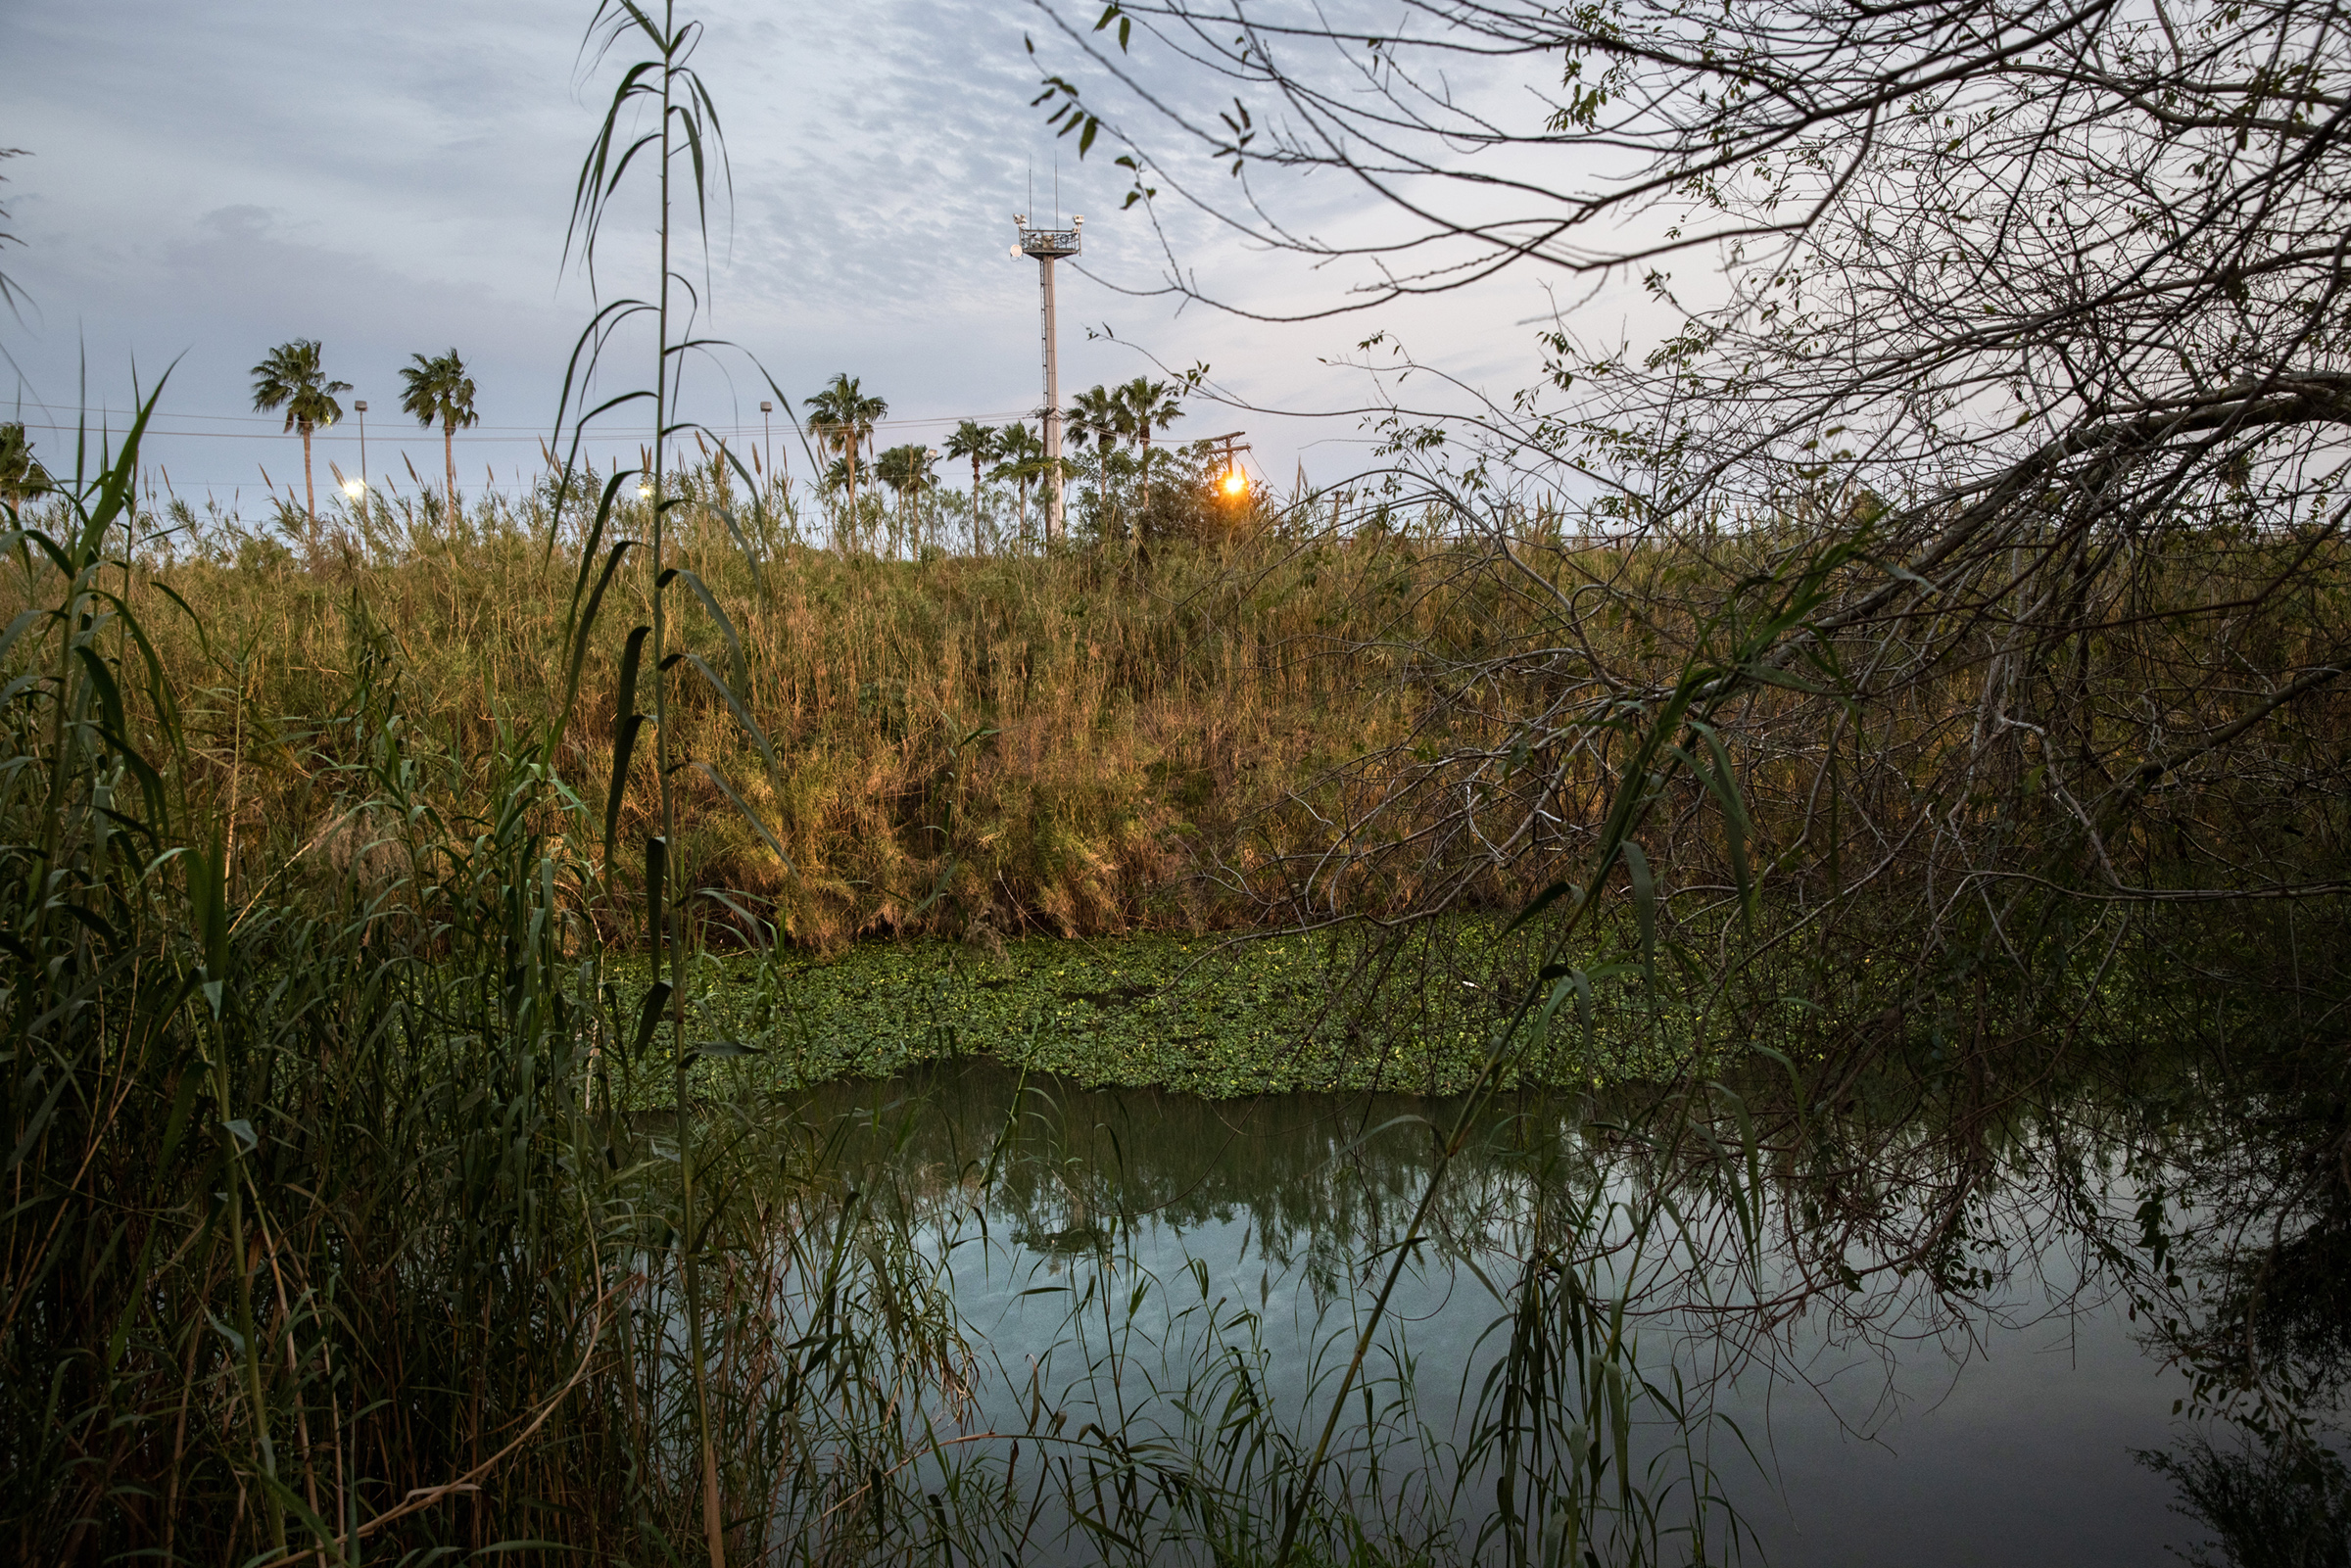 A U.S. Border Patrol surveillance tower stands on the other side of the Rio Grande in Matamoros, Mexico, on Feb. 7, 2021. (John Moore—Getty Images)